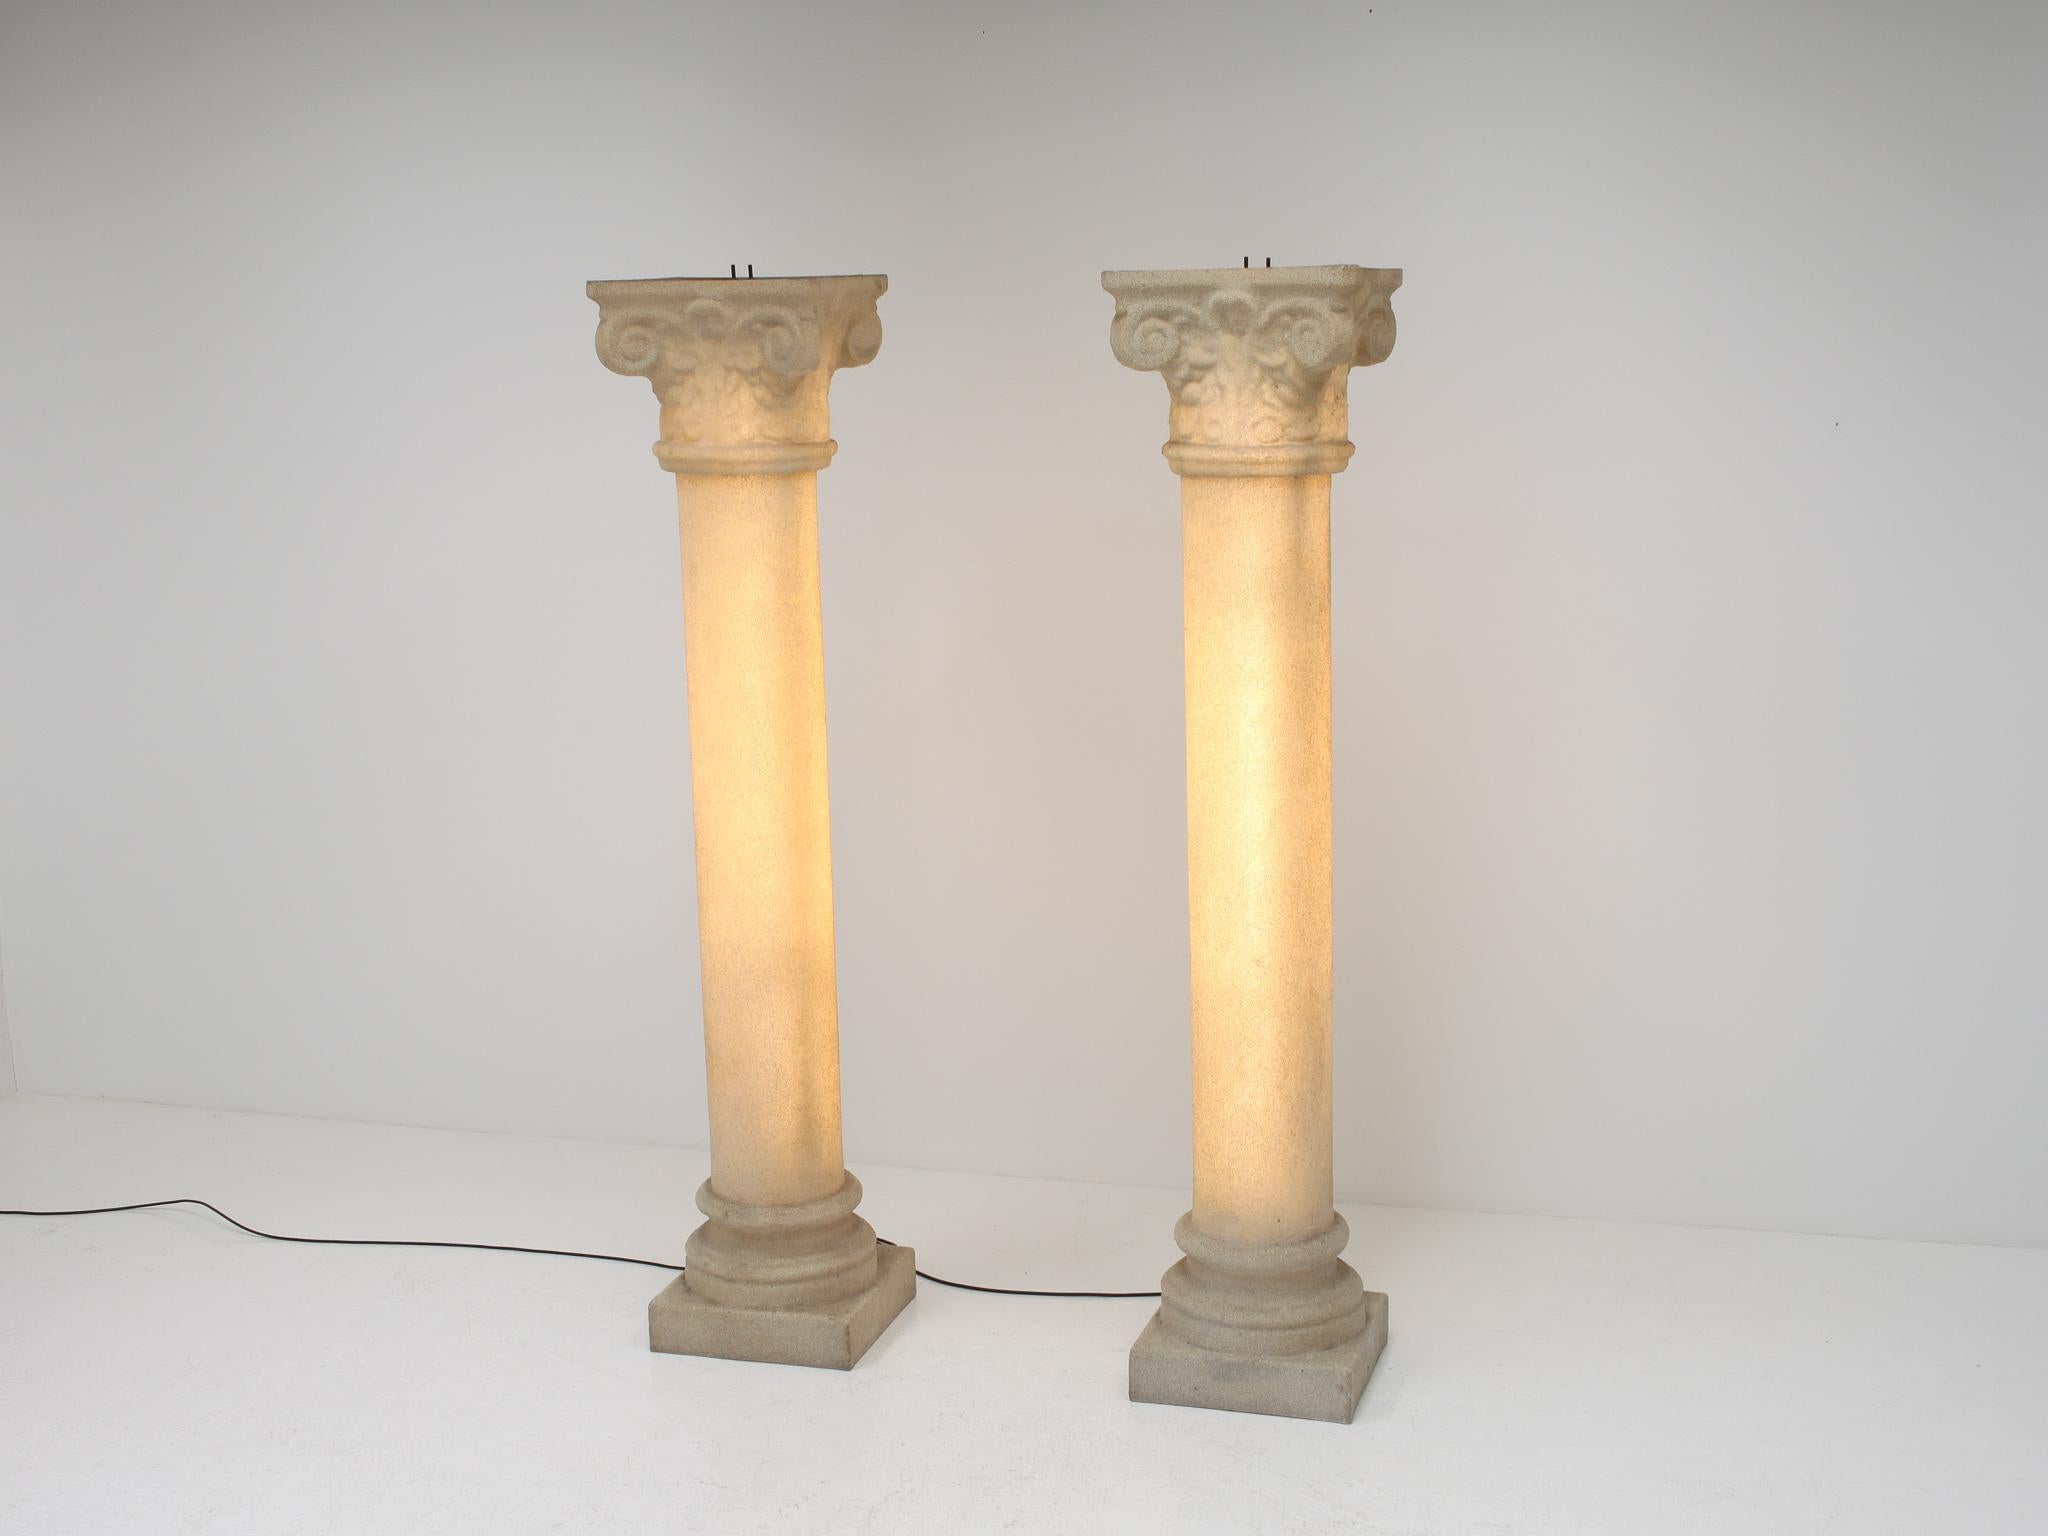 Plastic Pair of 6.5ft Giant Column Lamps by Andre Cazenave for Singleton Italy, 1970's For Sale